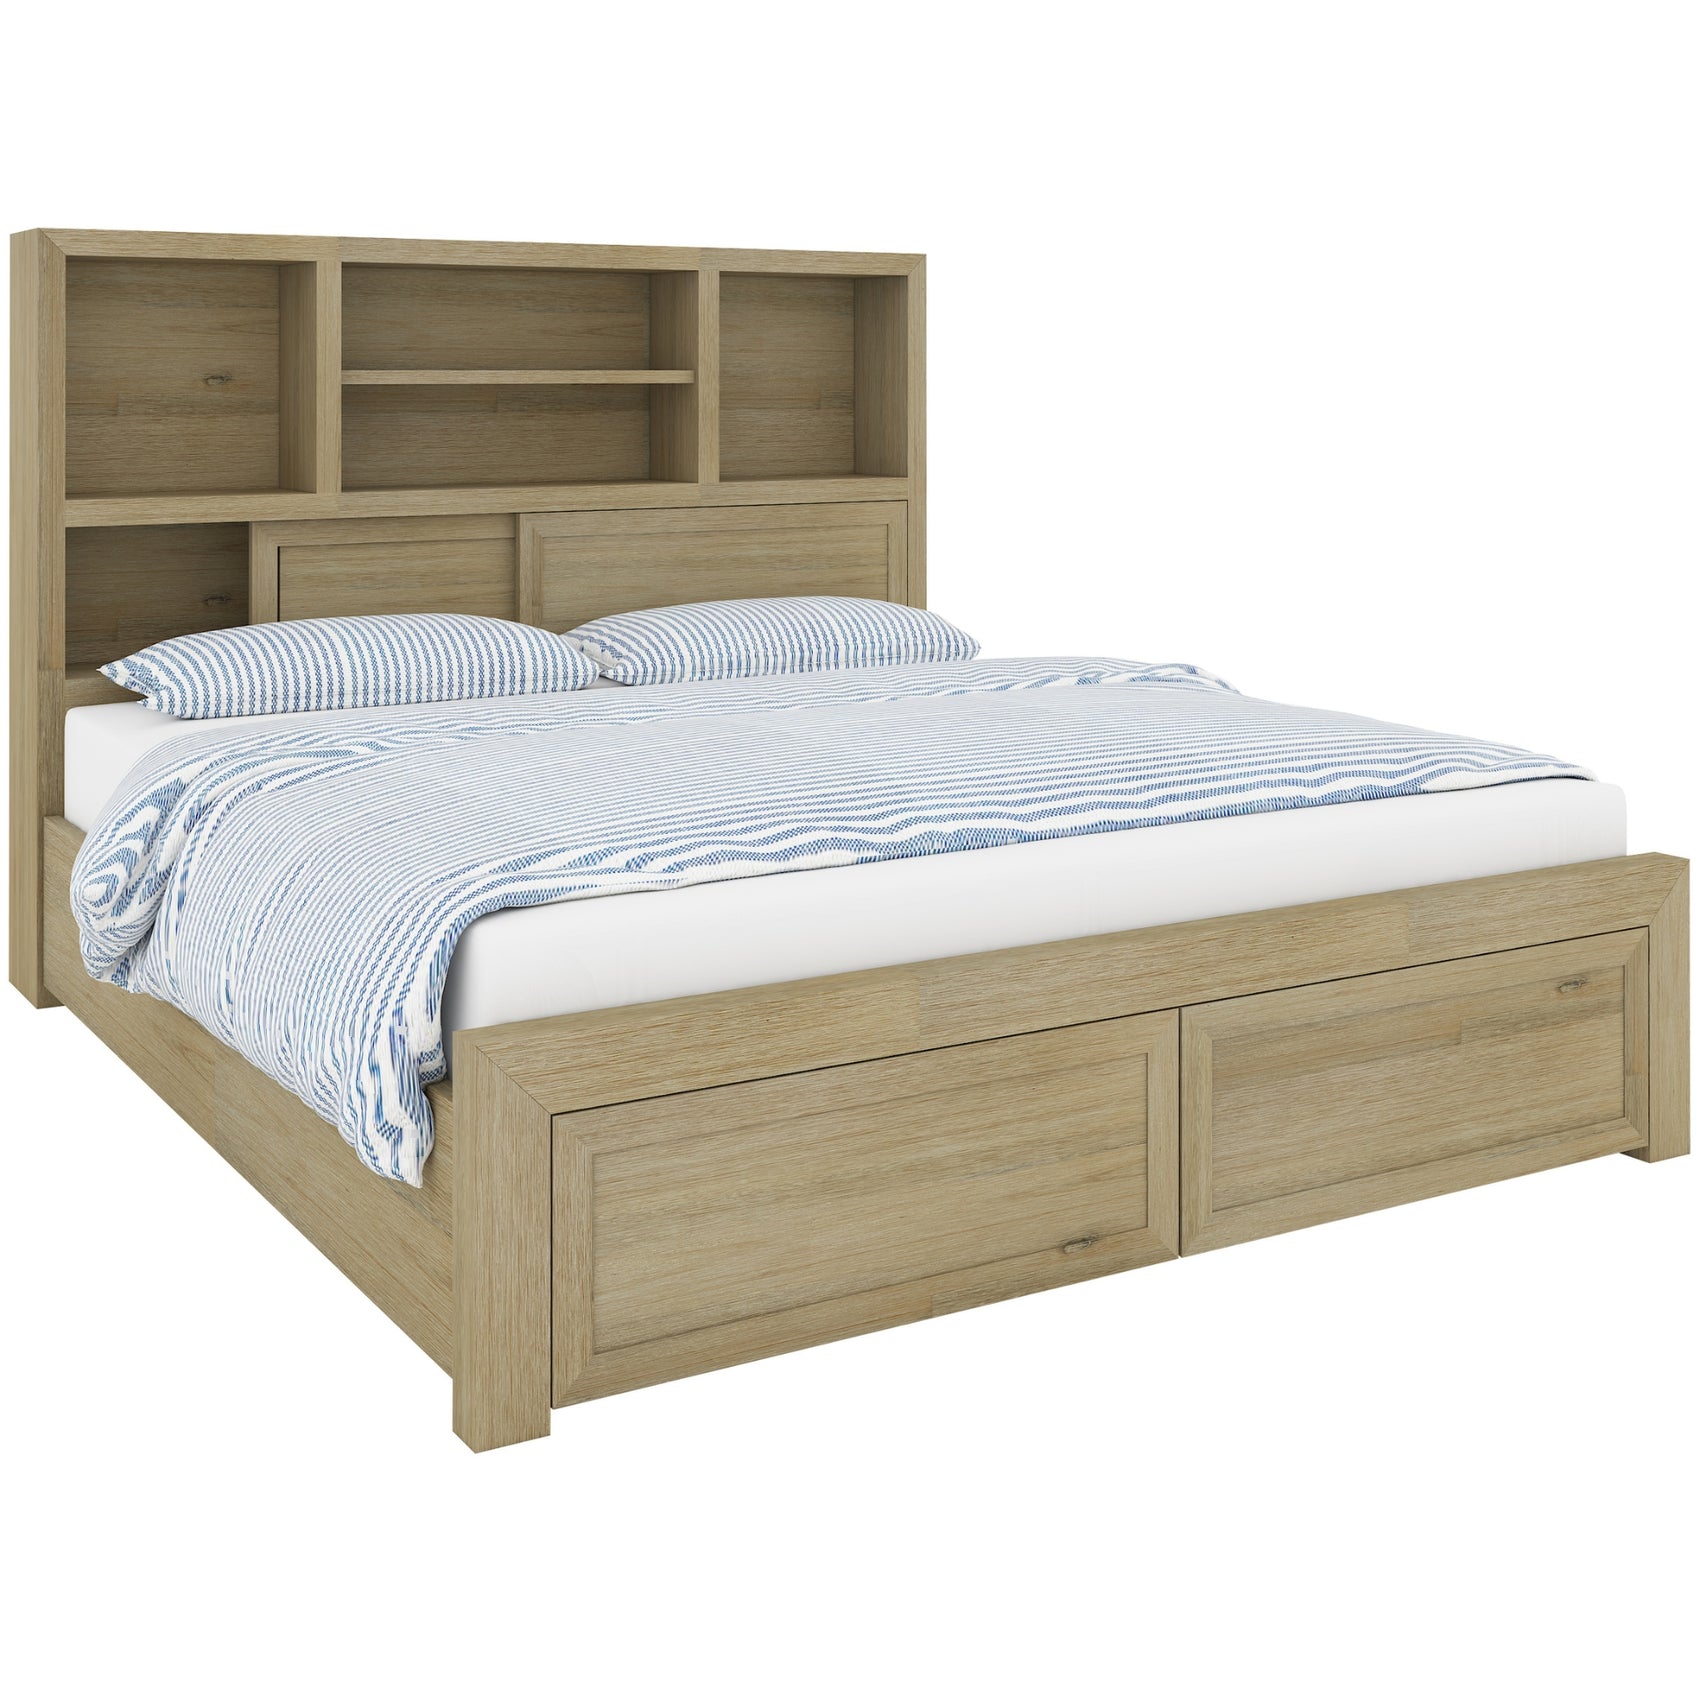 Gracelyn Queen Bed Frame Solid Wood Mattress Base With Storage Drawers - Smoke